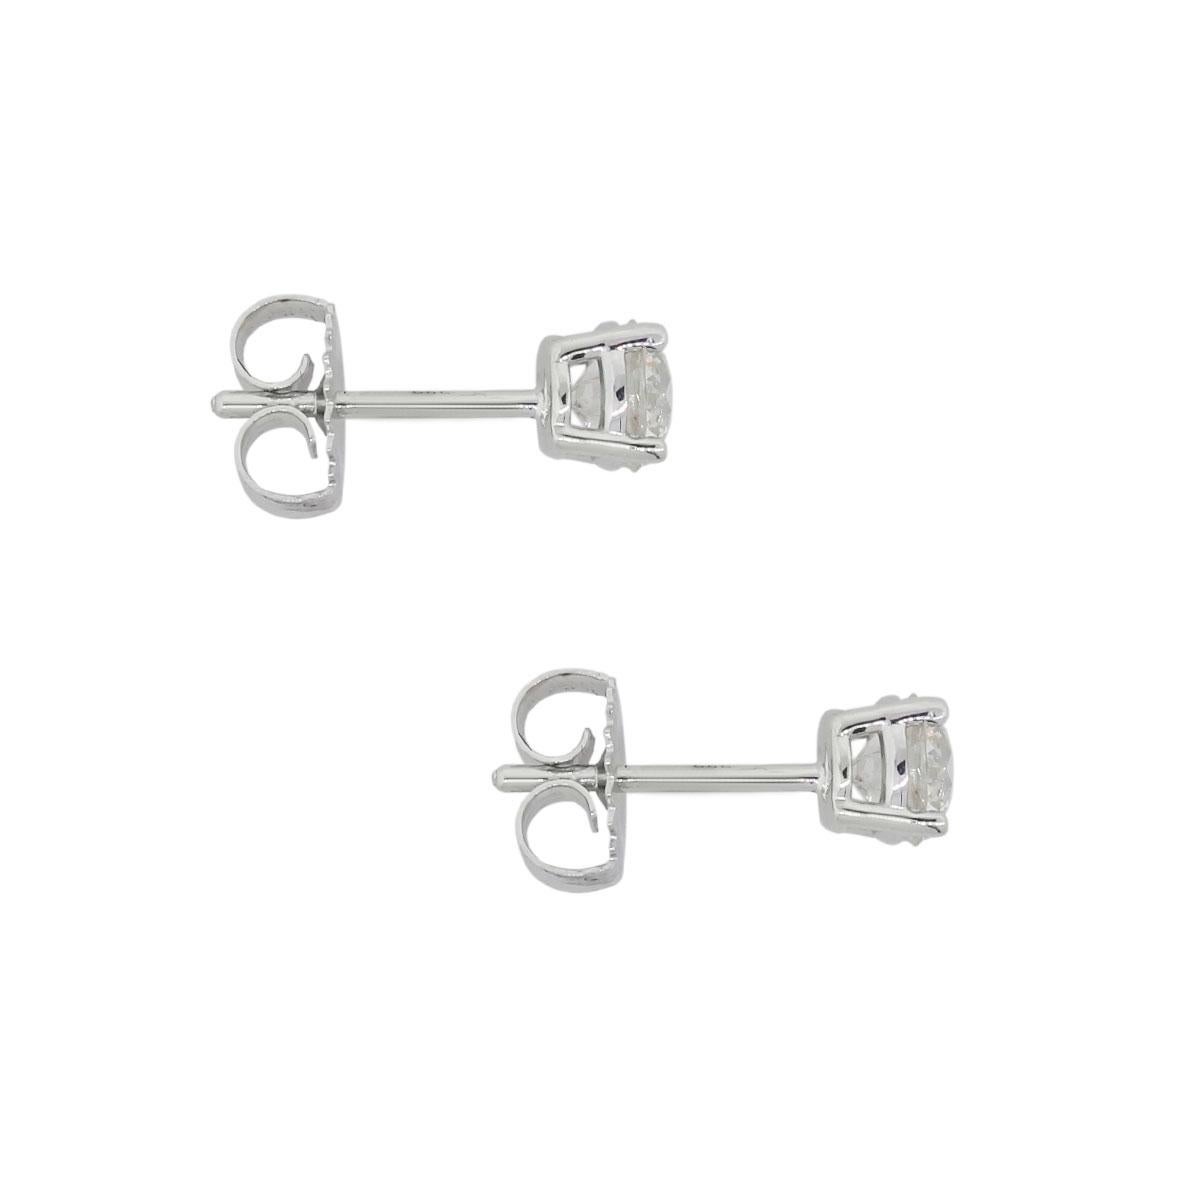 Material: 14k white gold
Diamond Details: Approximately 1.07ctw of Old European Cut Diamonds. Diamonds are G/H in color and SI in clarity.
Measurements: 0.60″ x 0.19″ x 0.19″
Earring Backs: Post friction
Total Weight: 1.3g (0.8dwt)
Additional